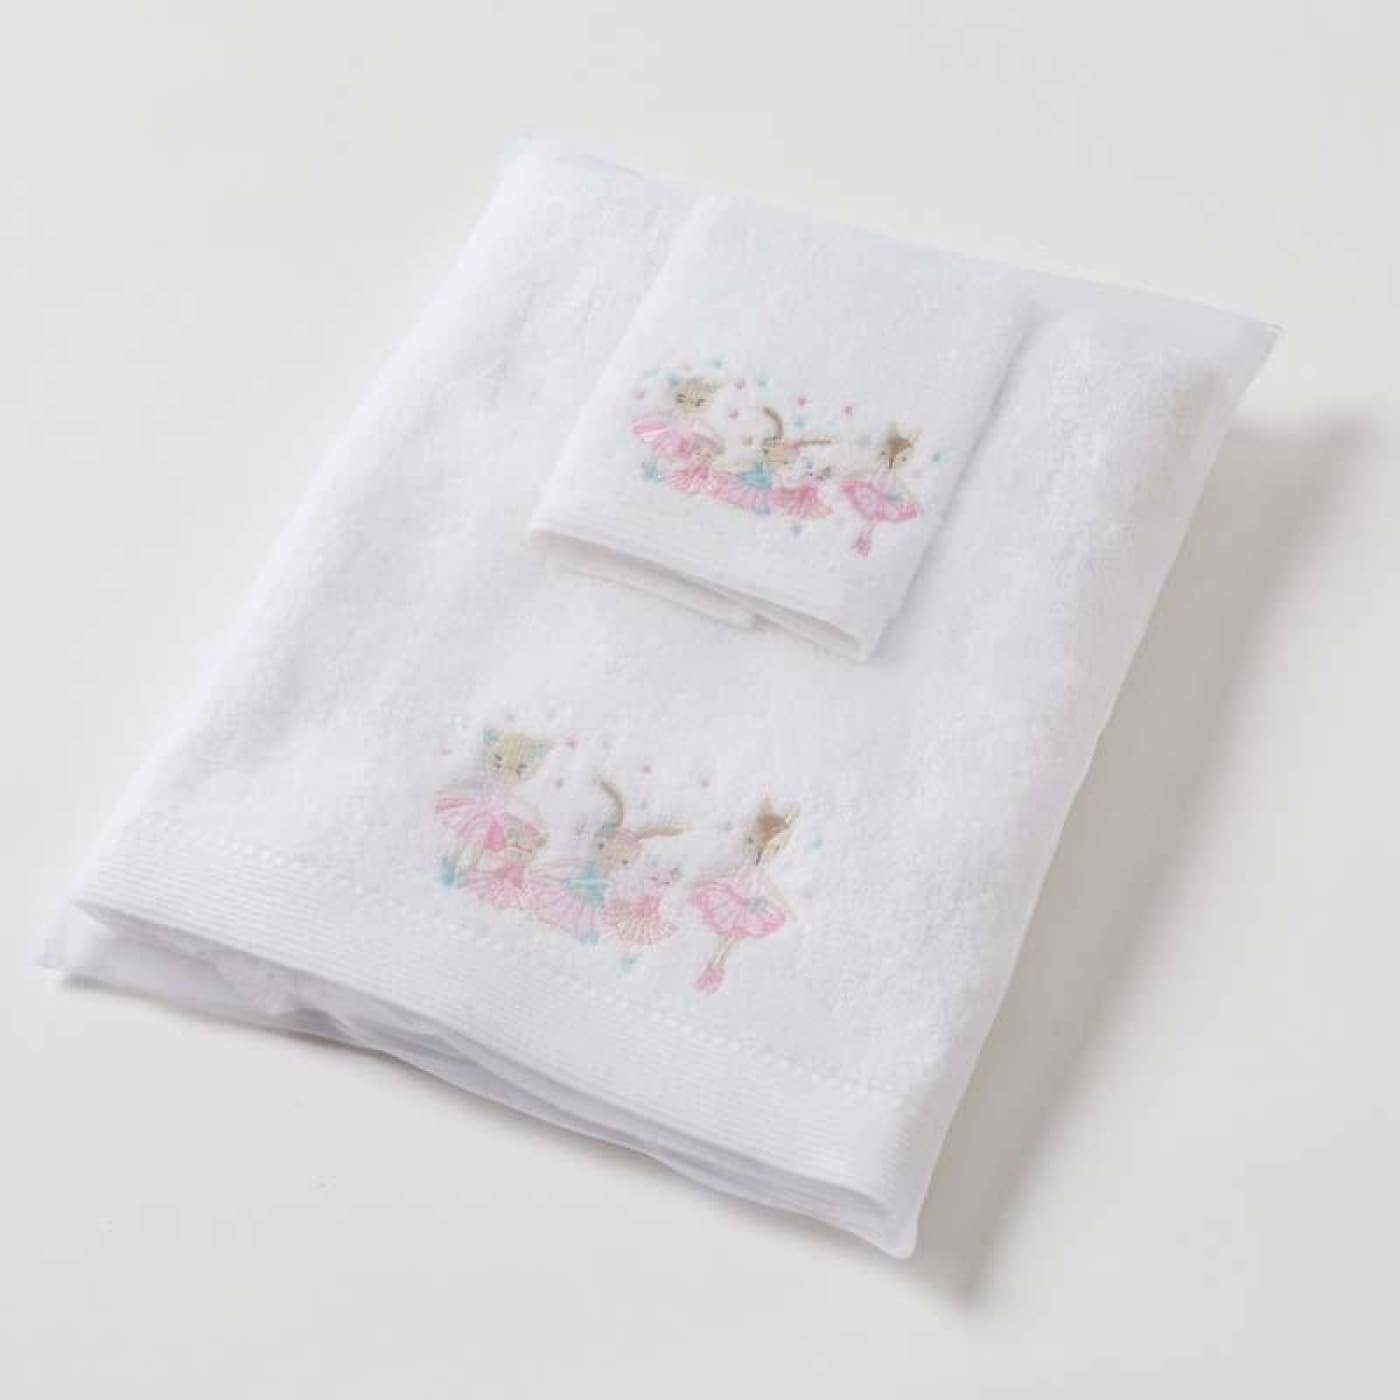 Pilbeam Towel and Face Washer in Organza Bag - Ballerina - BATHTIME & CHANGING - TOWELS/WASHERS